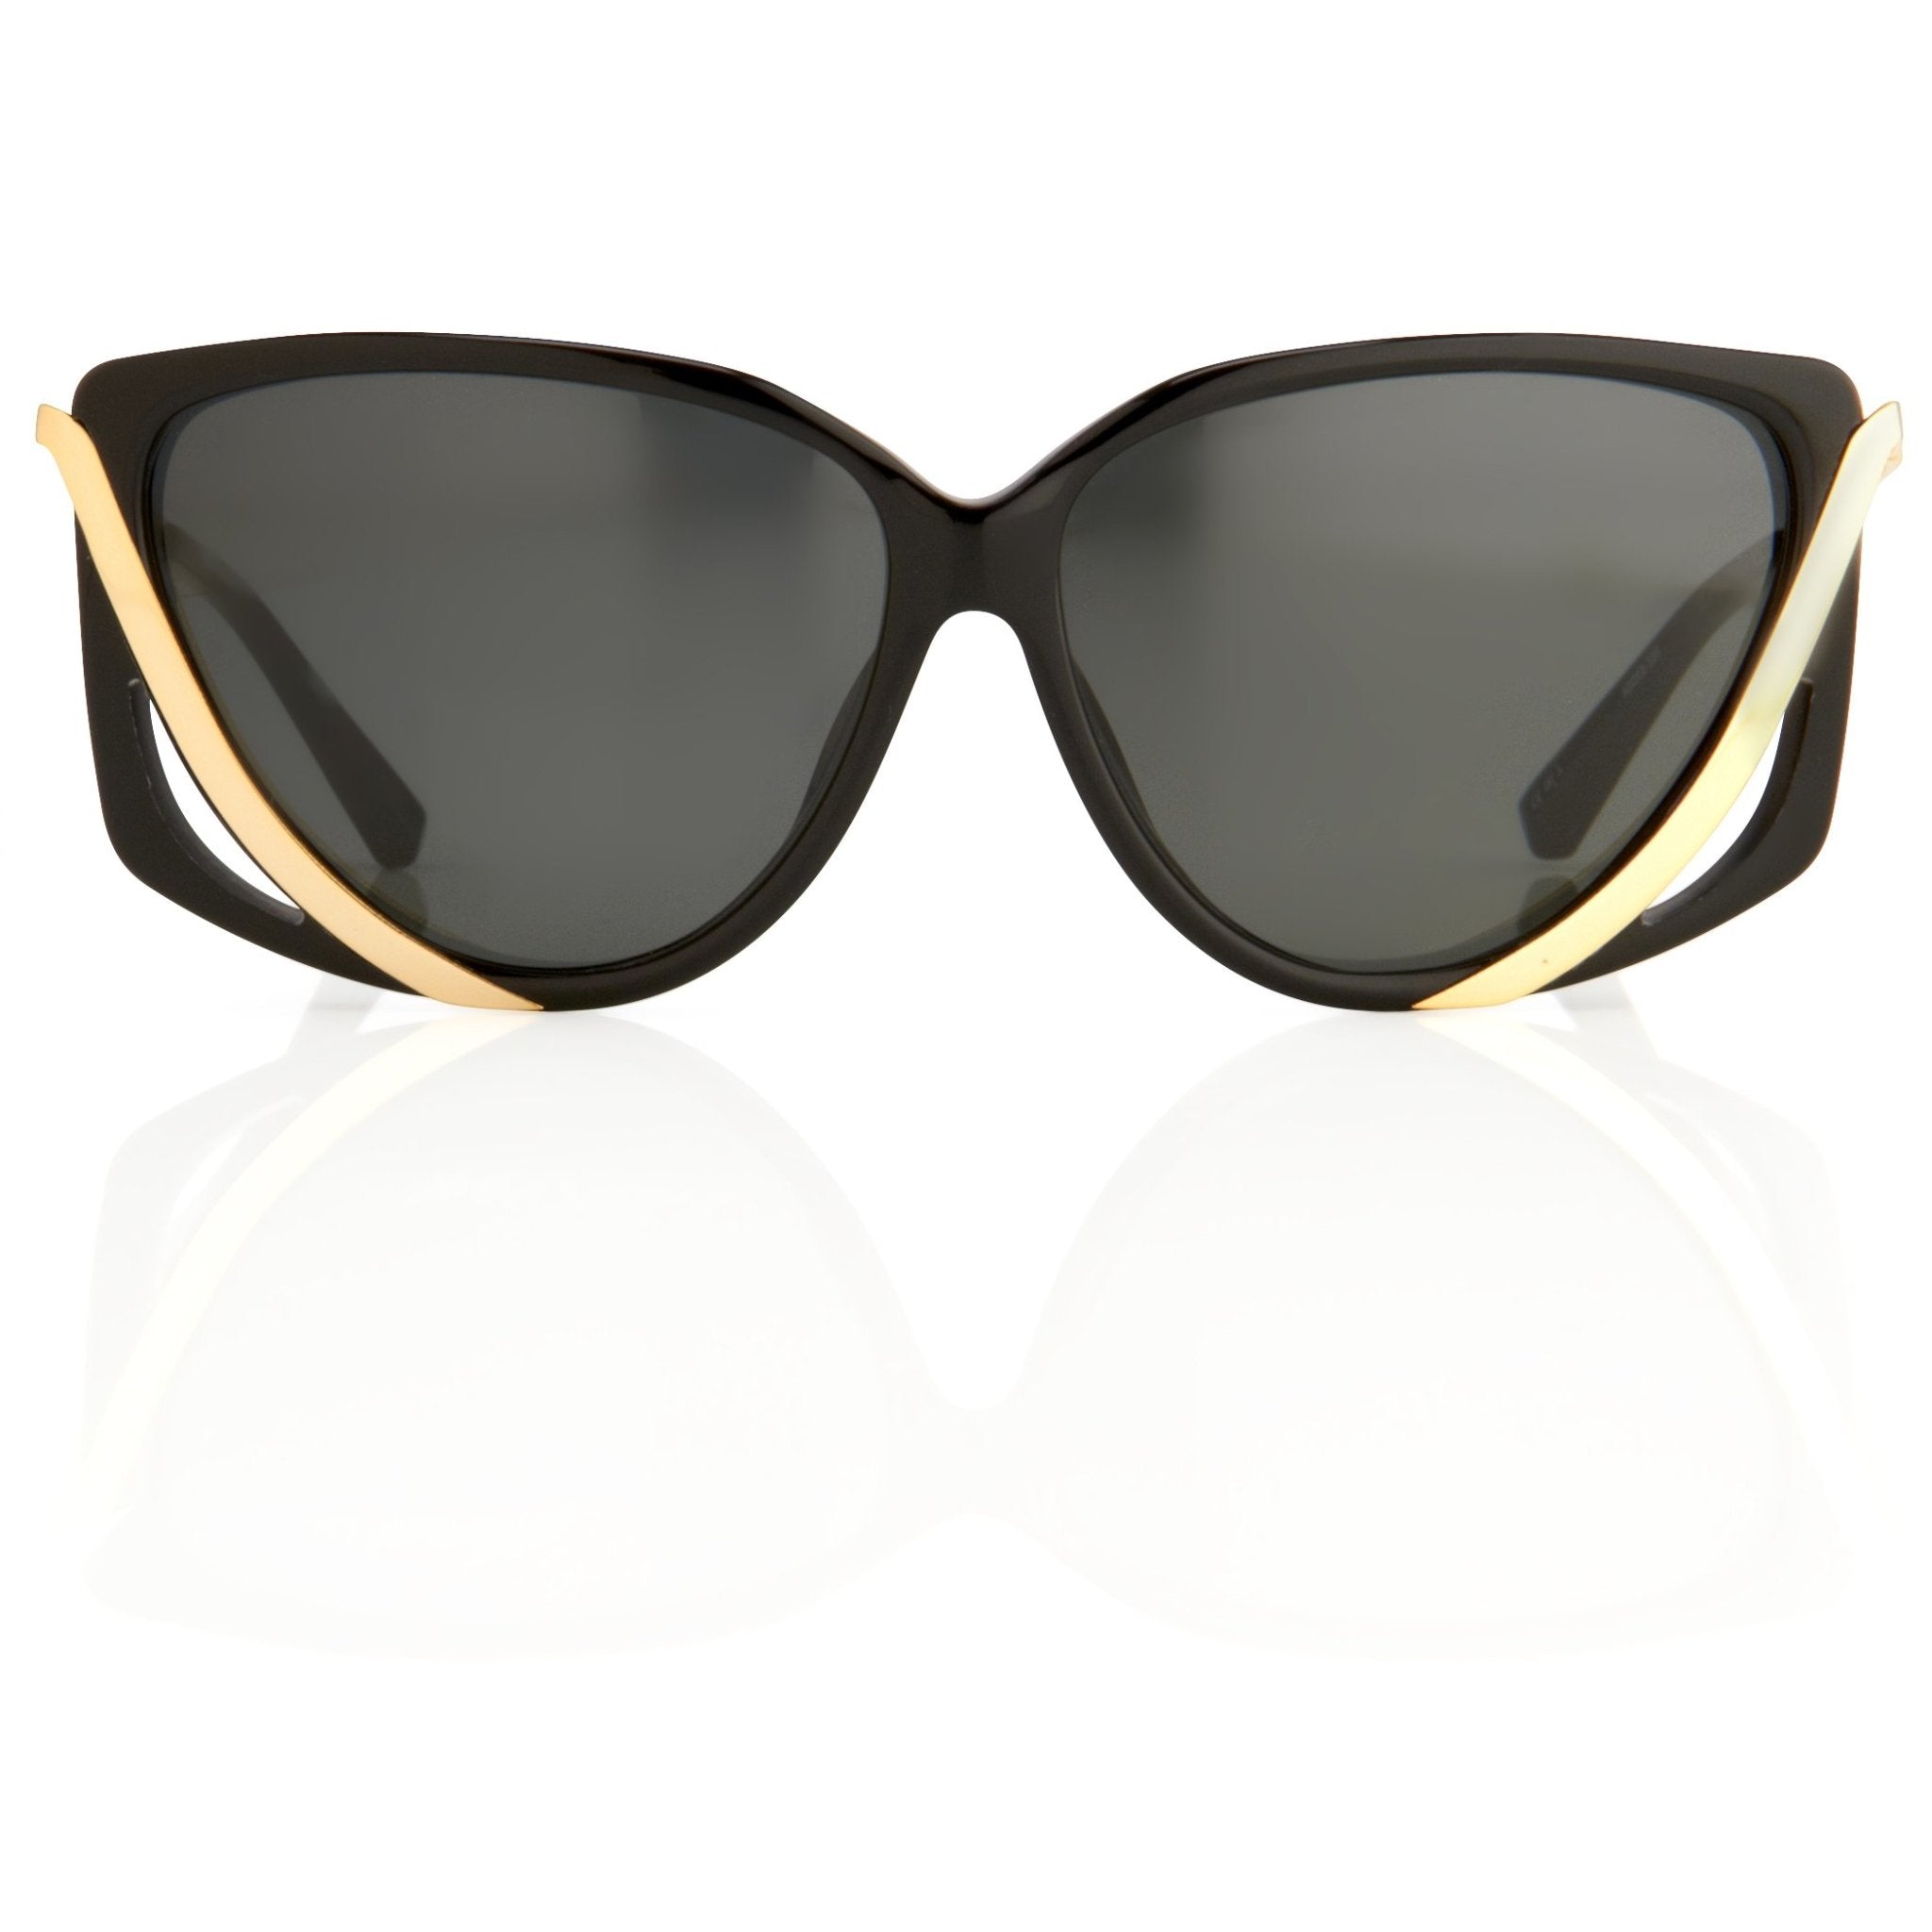 Prabal Gurung Sunglasses Rectangular Black Cut Out With Grey Category 3 Lenses PG4C1SUN - Watches & Crystals